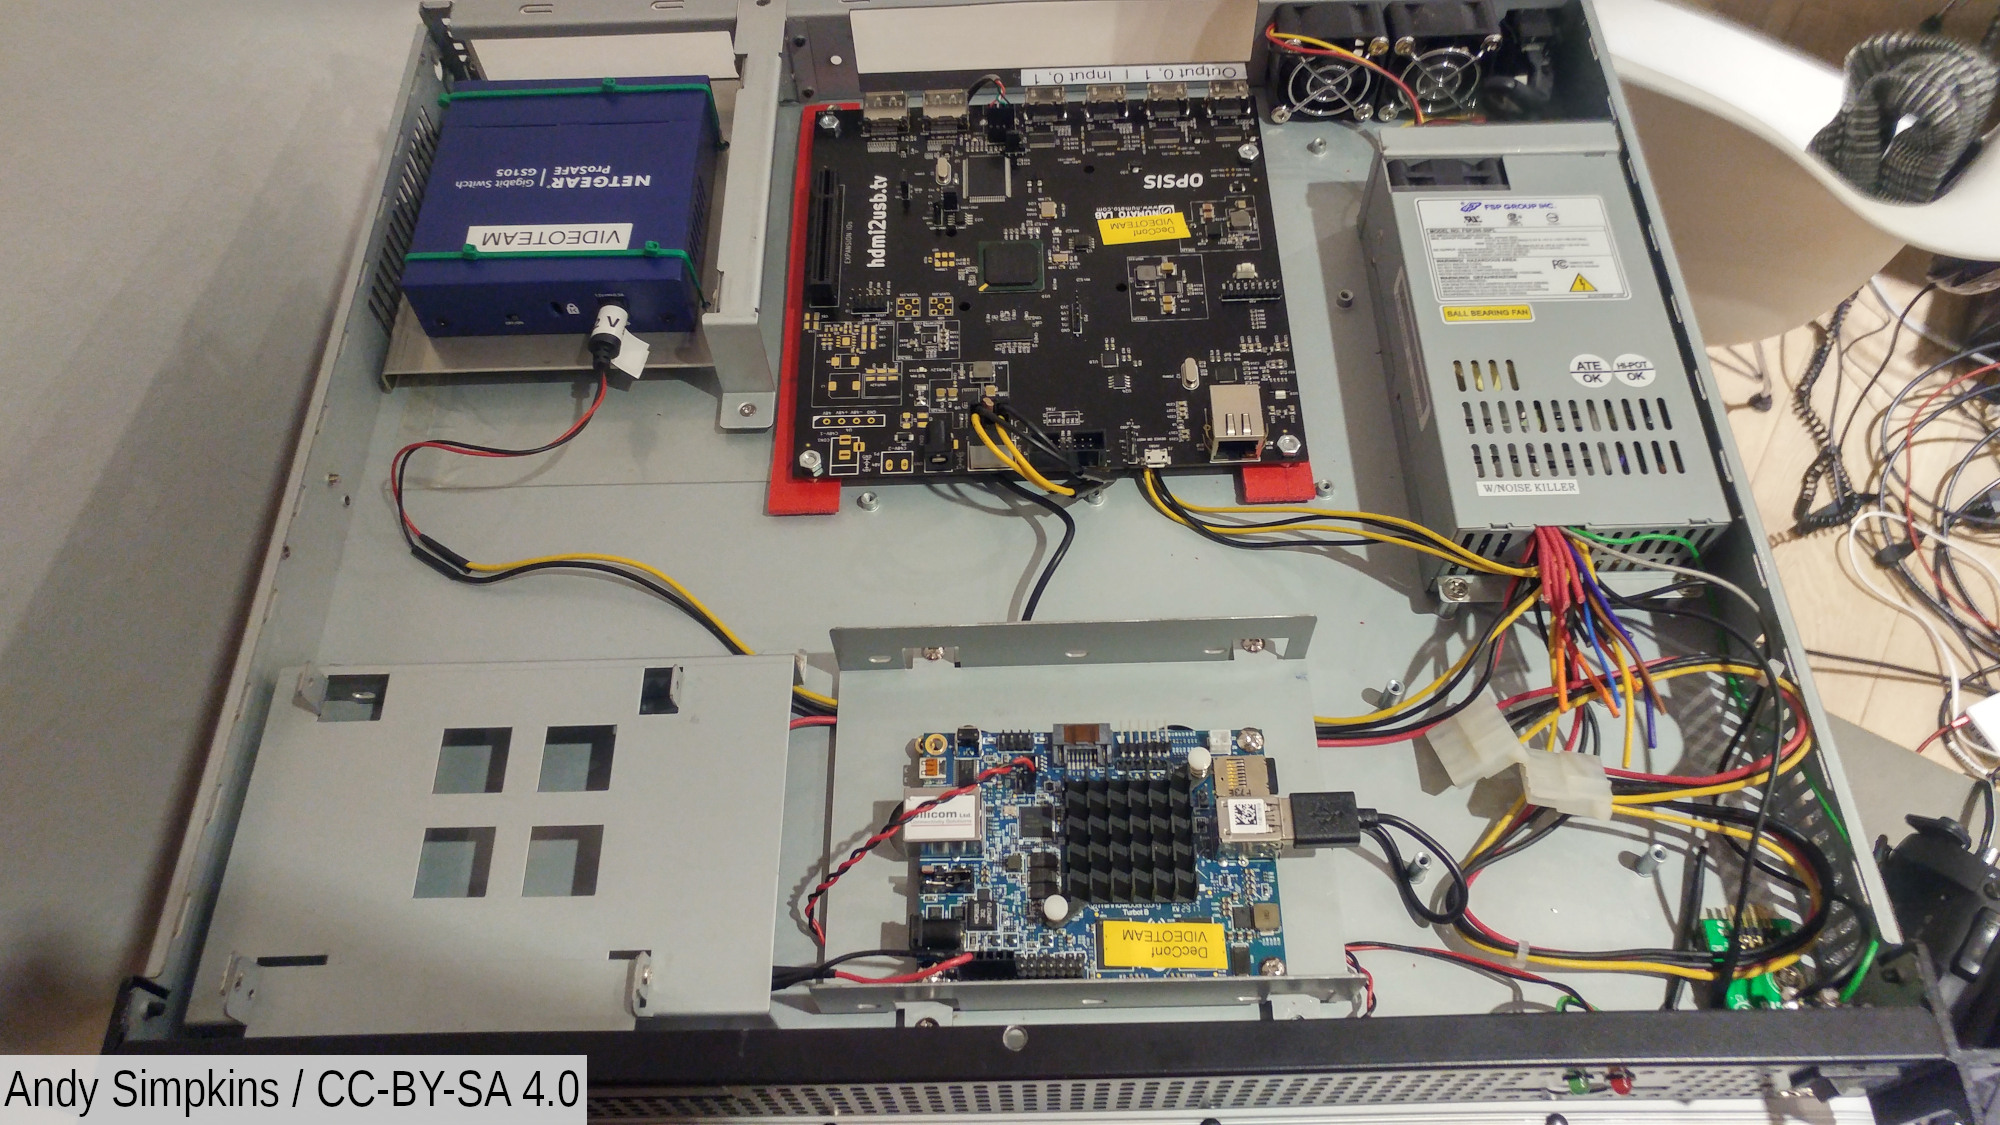 A Numato Osis, a Minnowboard Turbot and an networking switch in the same 1U case